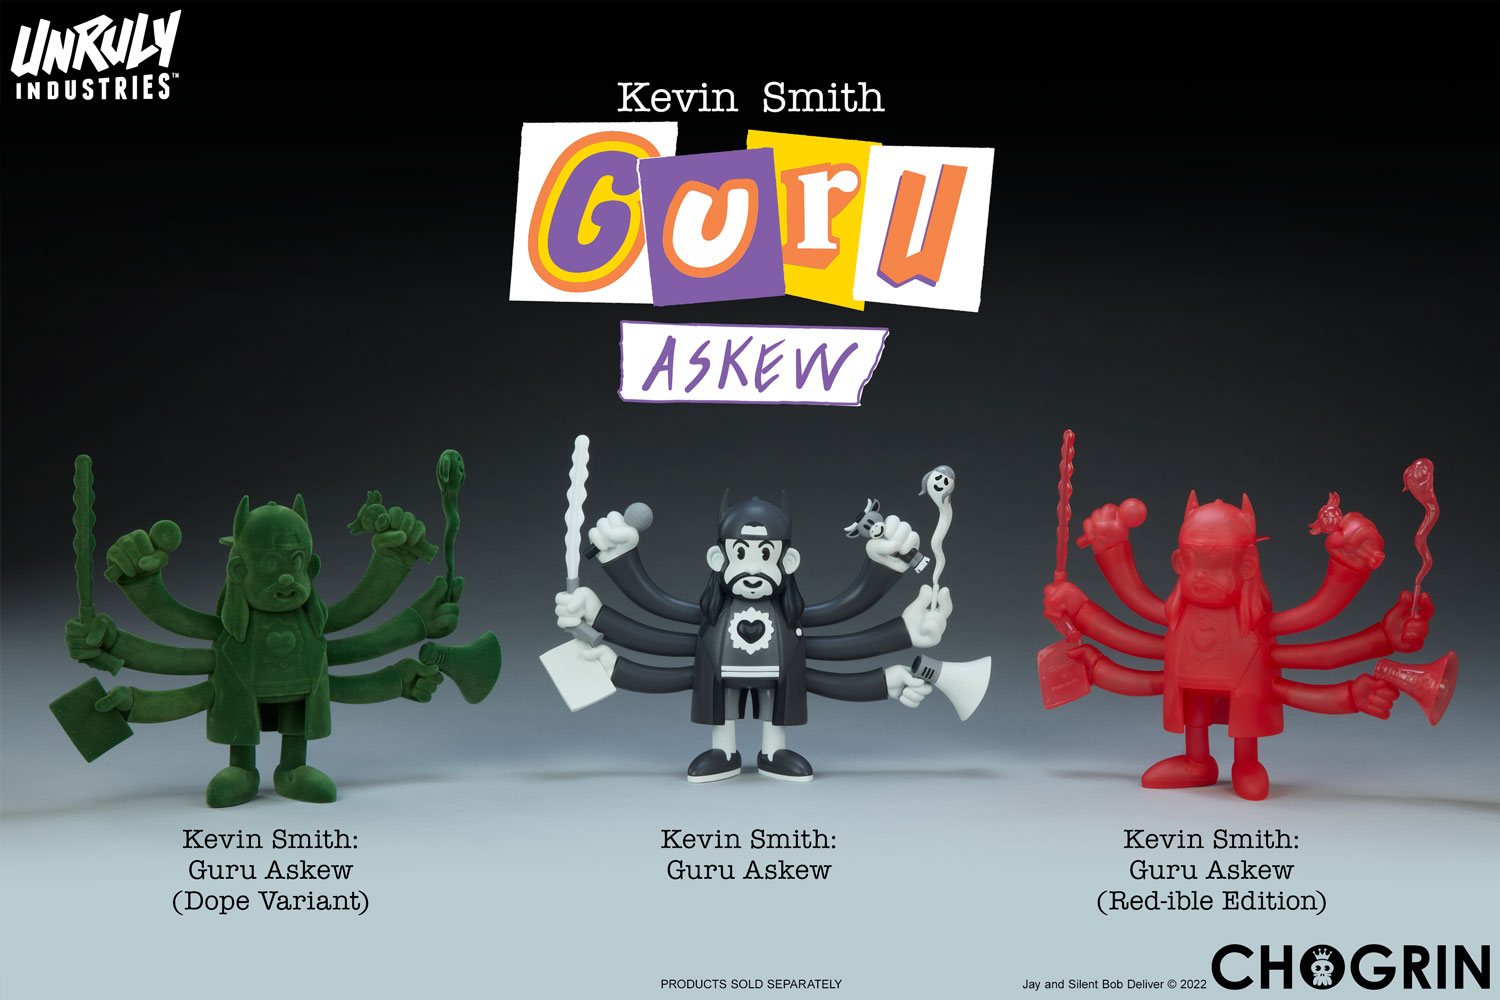 Kevin Smith: Guru Askew (Red-ible Variant) (Prototype Shown) View 18